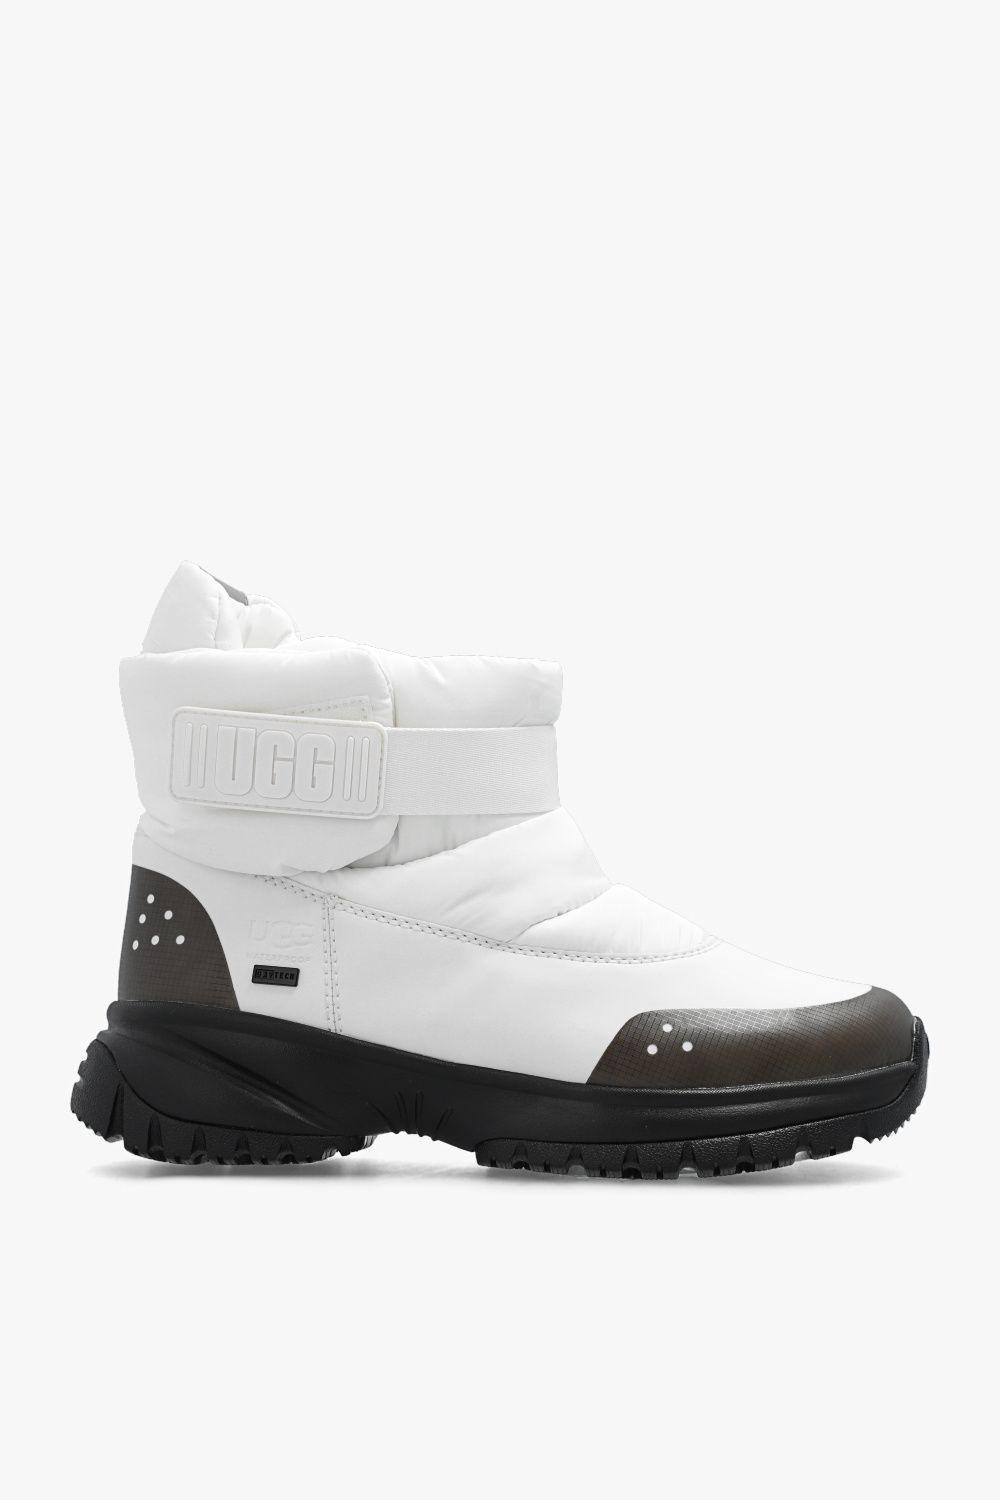 UGG 'yose Puff' Snow Boots in White | Lyst